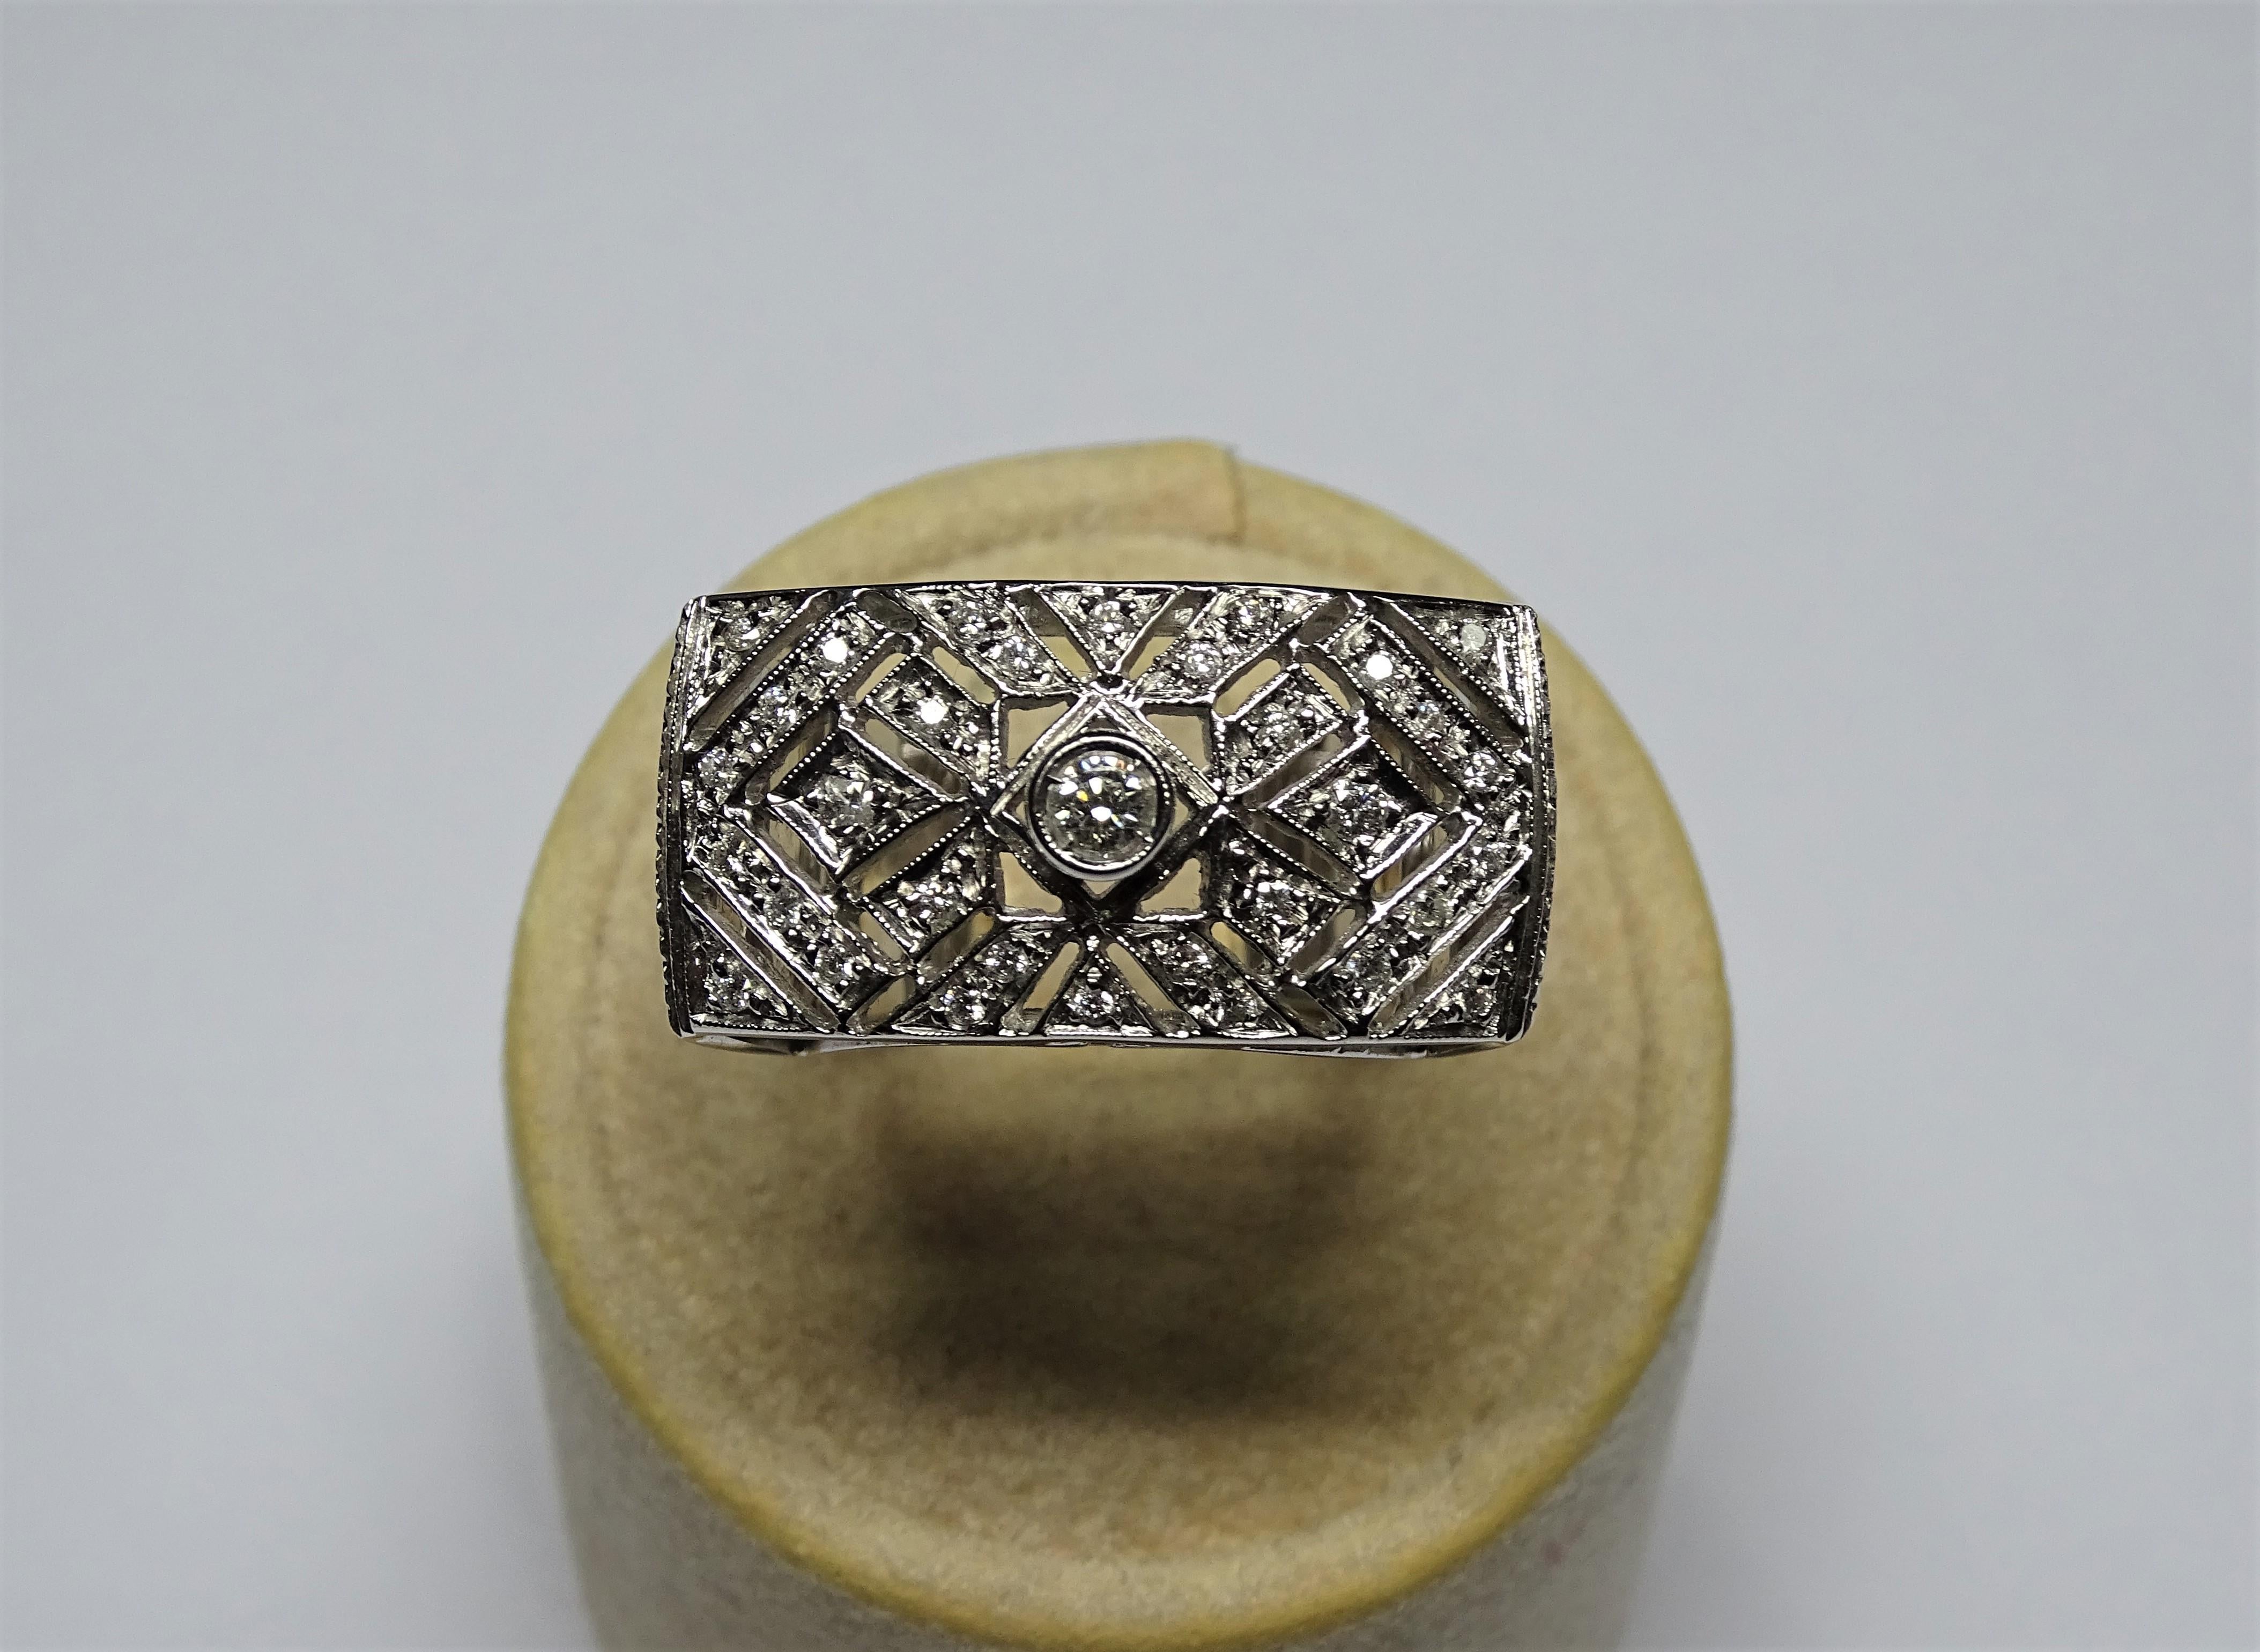 This Ring is made of 18K White Gold.
This Ring has 0.40 Carats of White Diamonds.
This Ring is inspired by Art Deco.
Size ITA: 16.5 - USA: 8
We're a workshop so every piece is handmade, customizable and resizable.